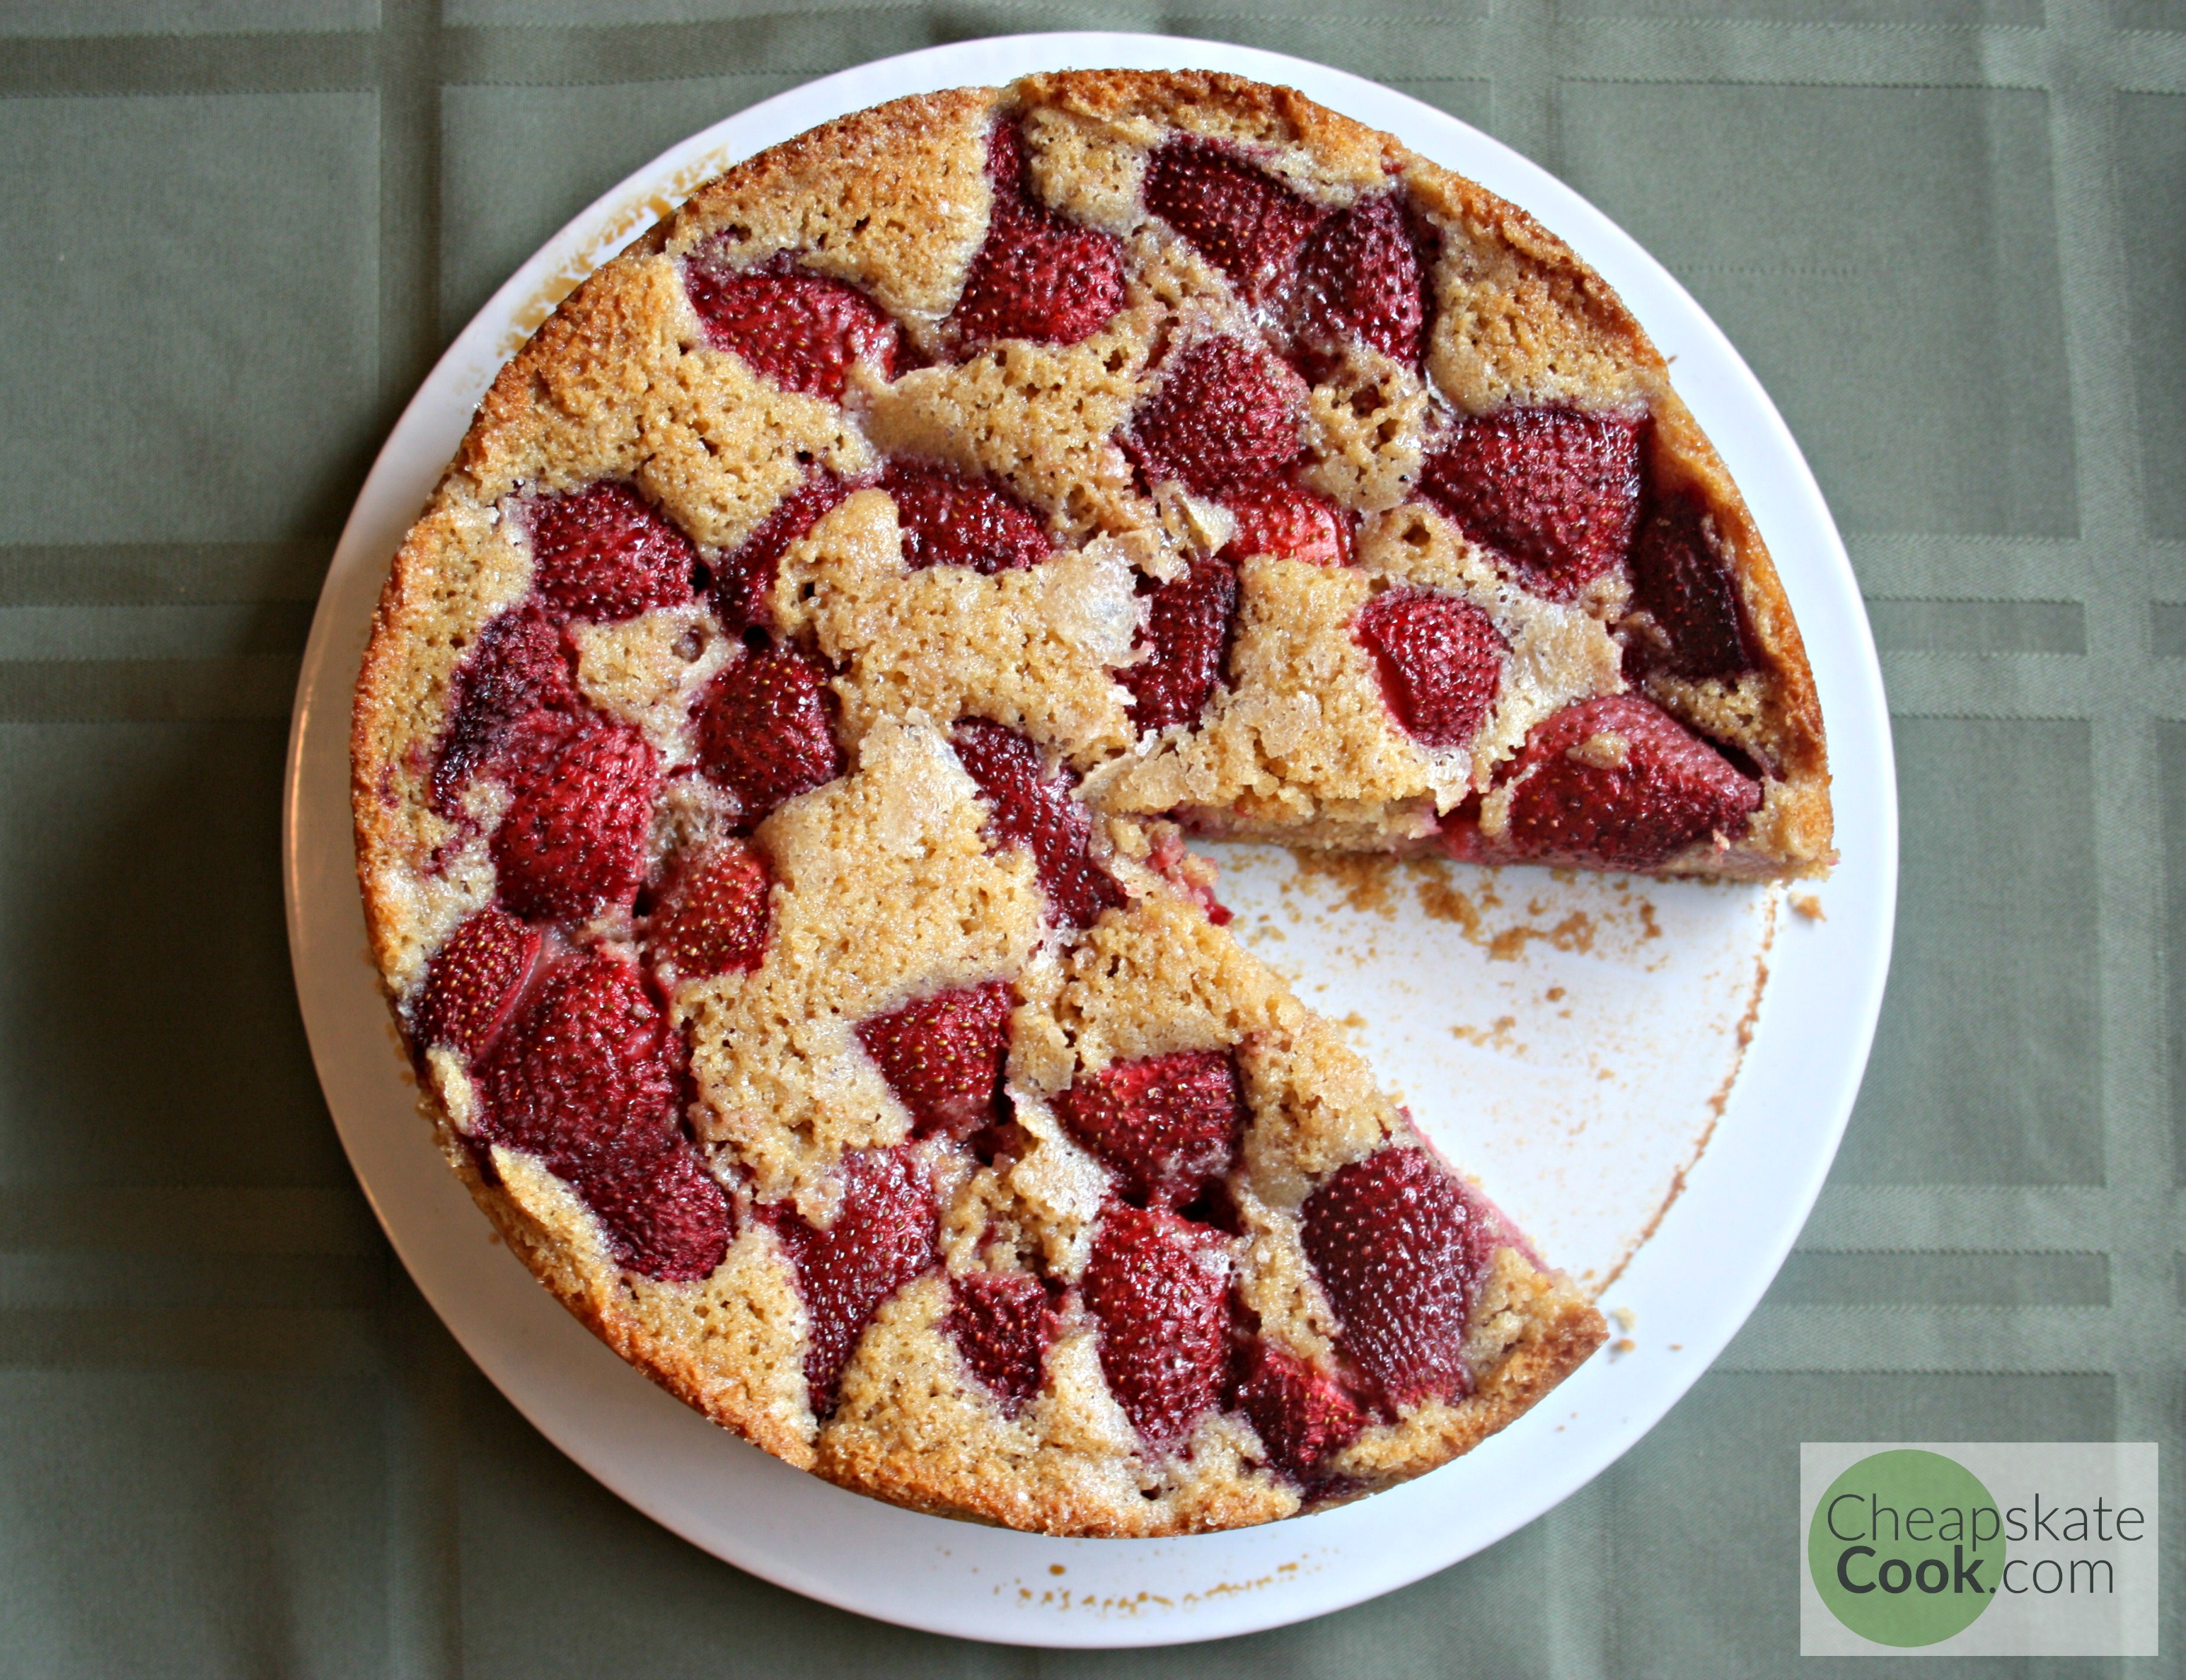 Strawberry Cake - healthy enough for breakfast, sweet enough for dessert! from CheapskateCook.com